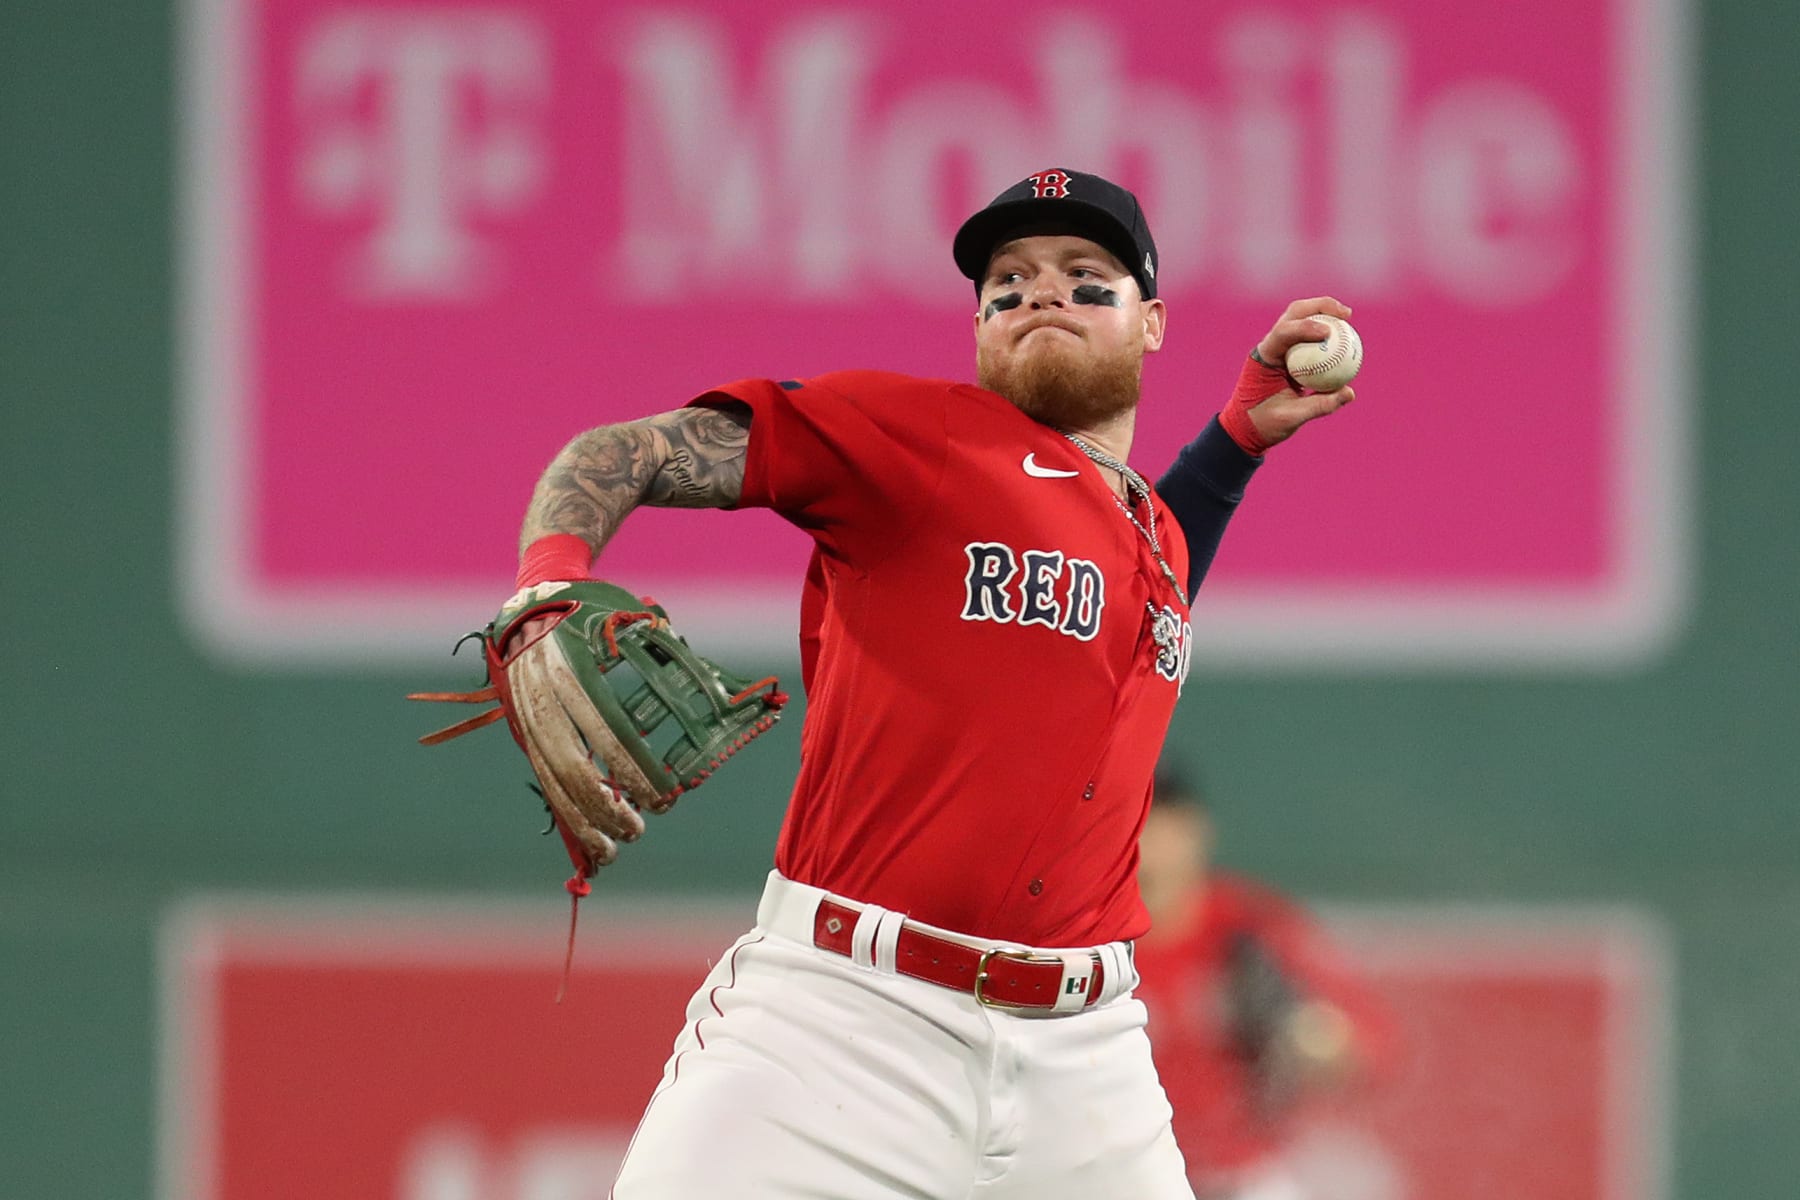 Red Sox top MLB payroll list and Reds below league average